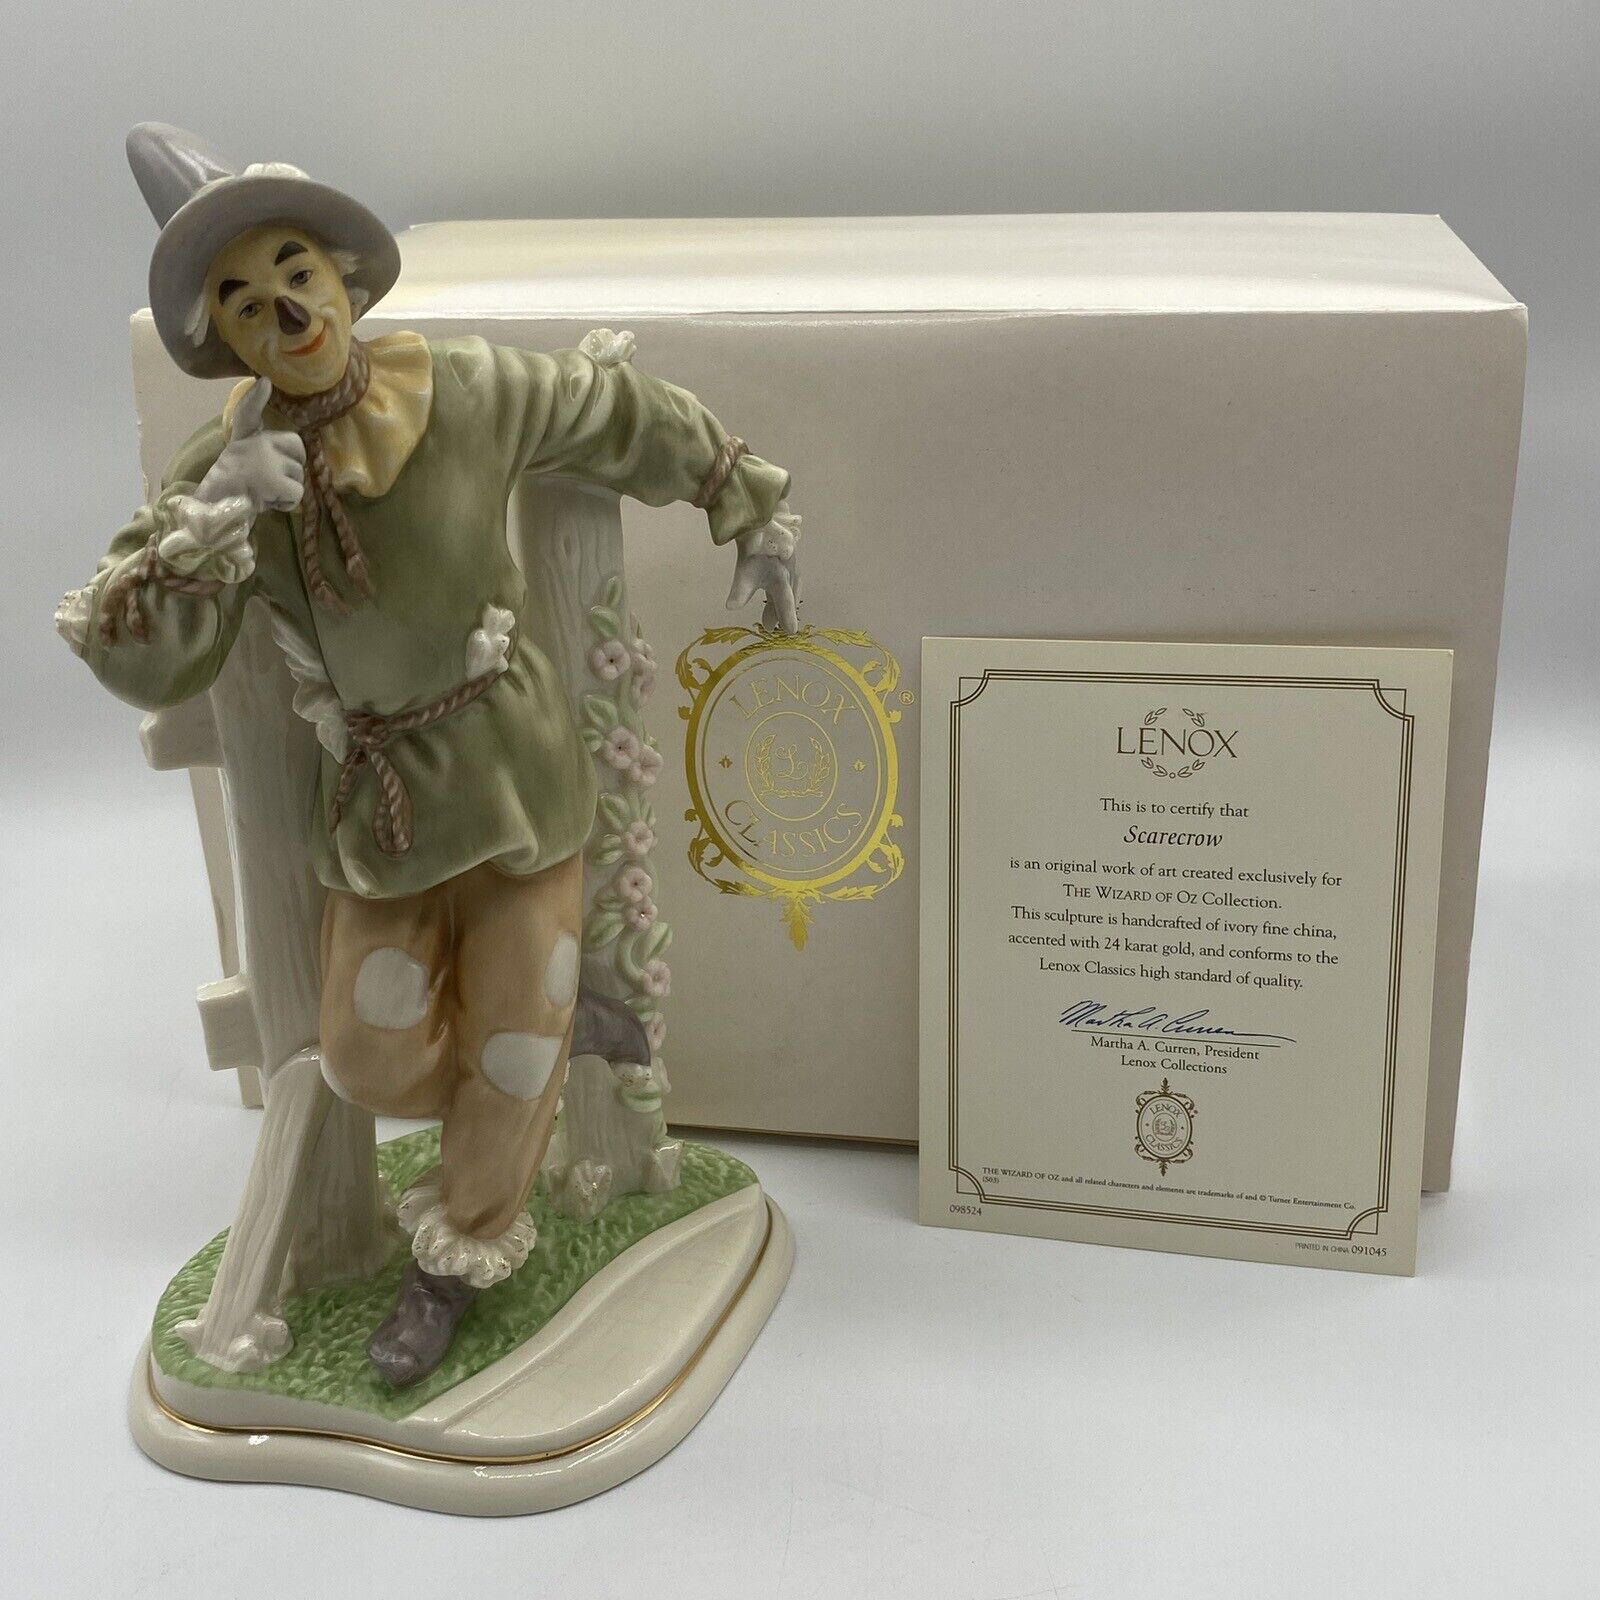 Classic The Wizard of Oz Scarecrow Lenox Figurine Collectable with COA